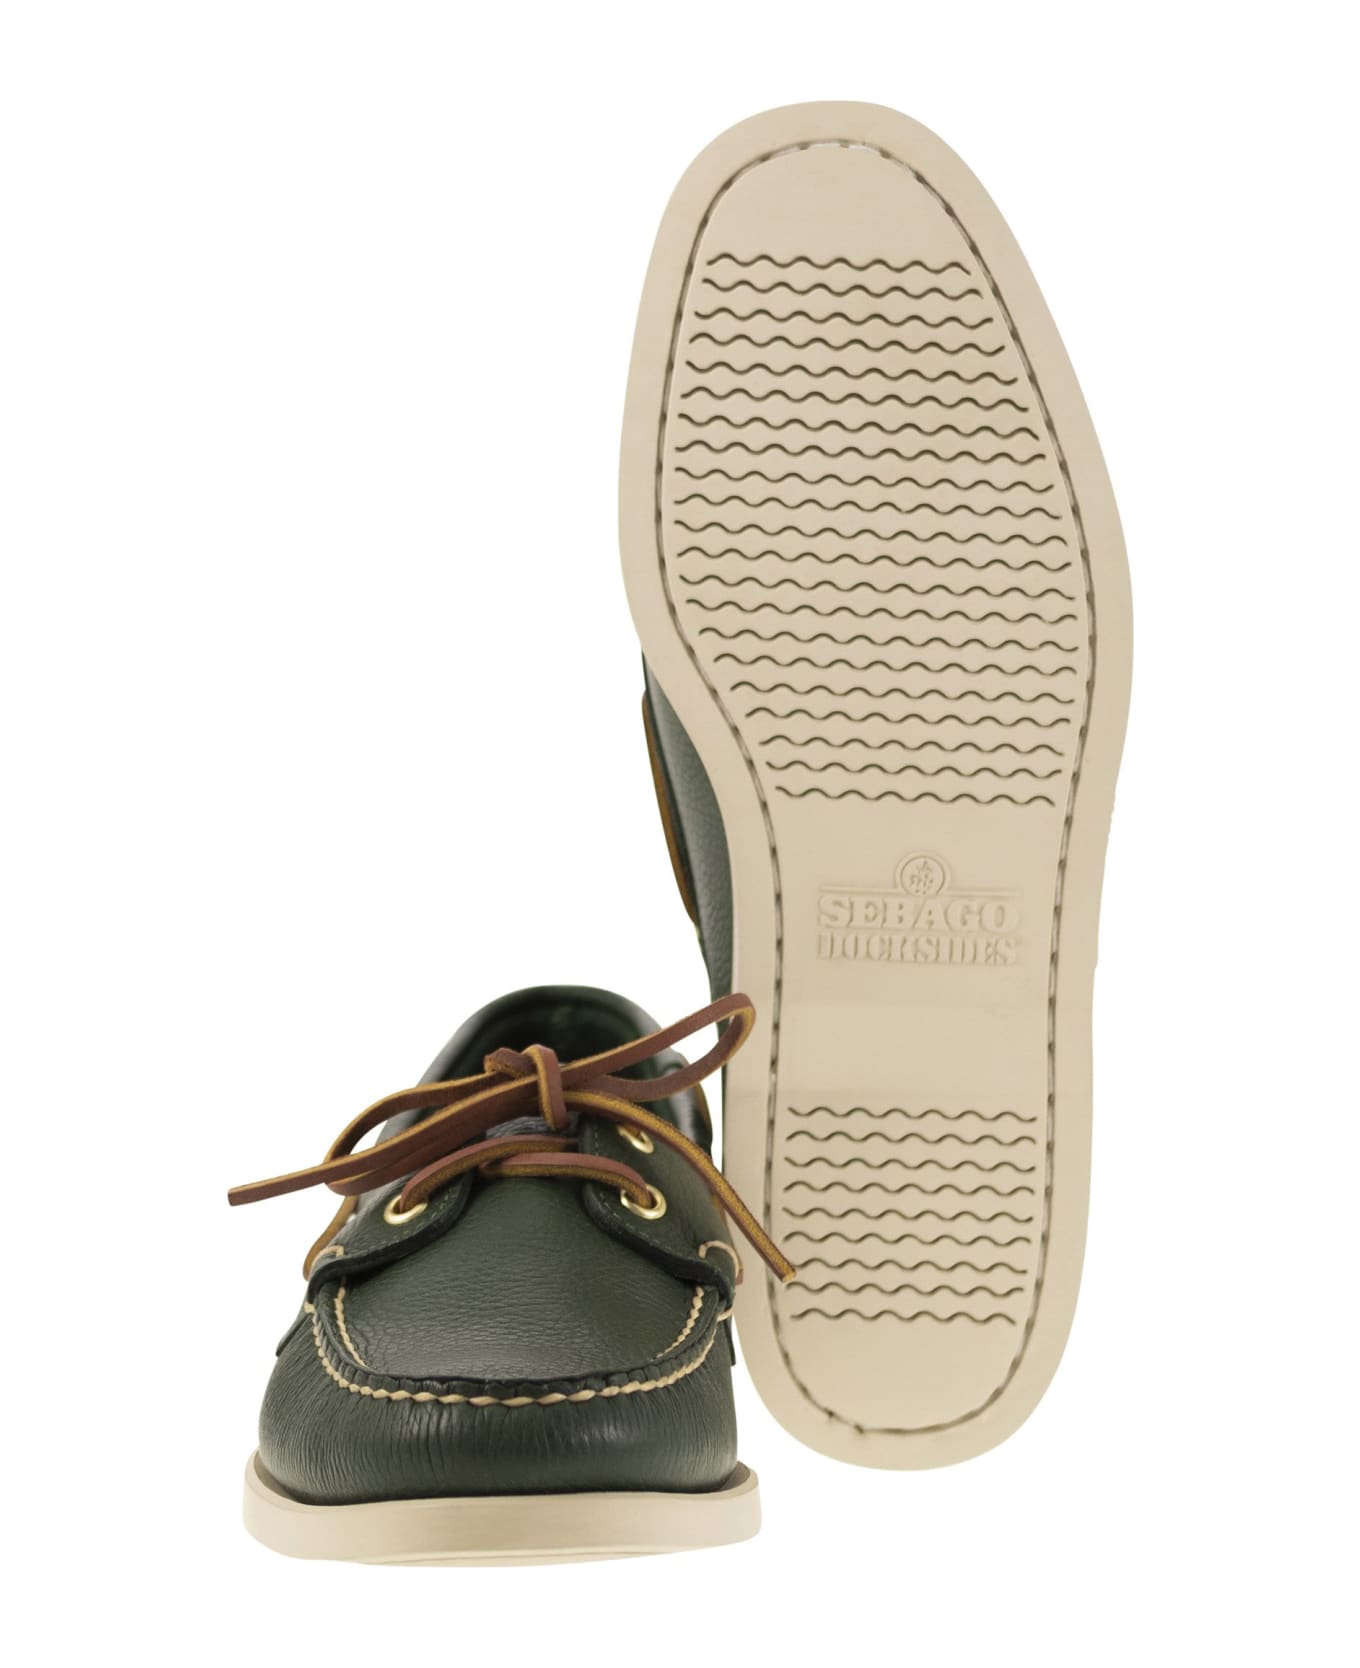 Sebago Portland - Moccasin With Grained Leather - Green ローファー＆デッキシューズ